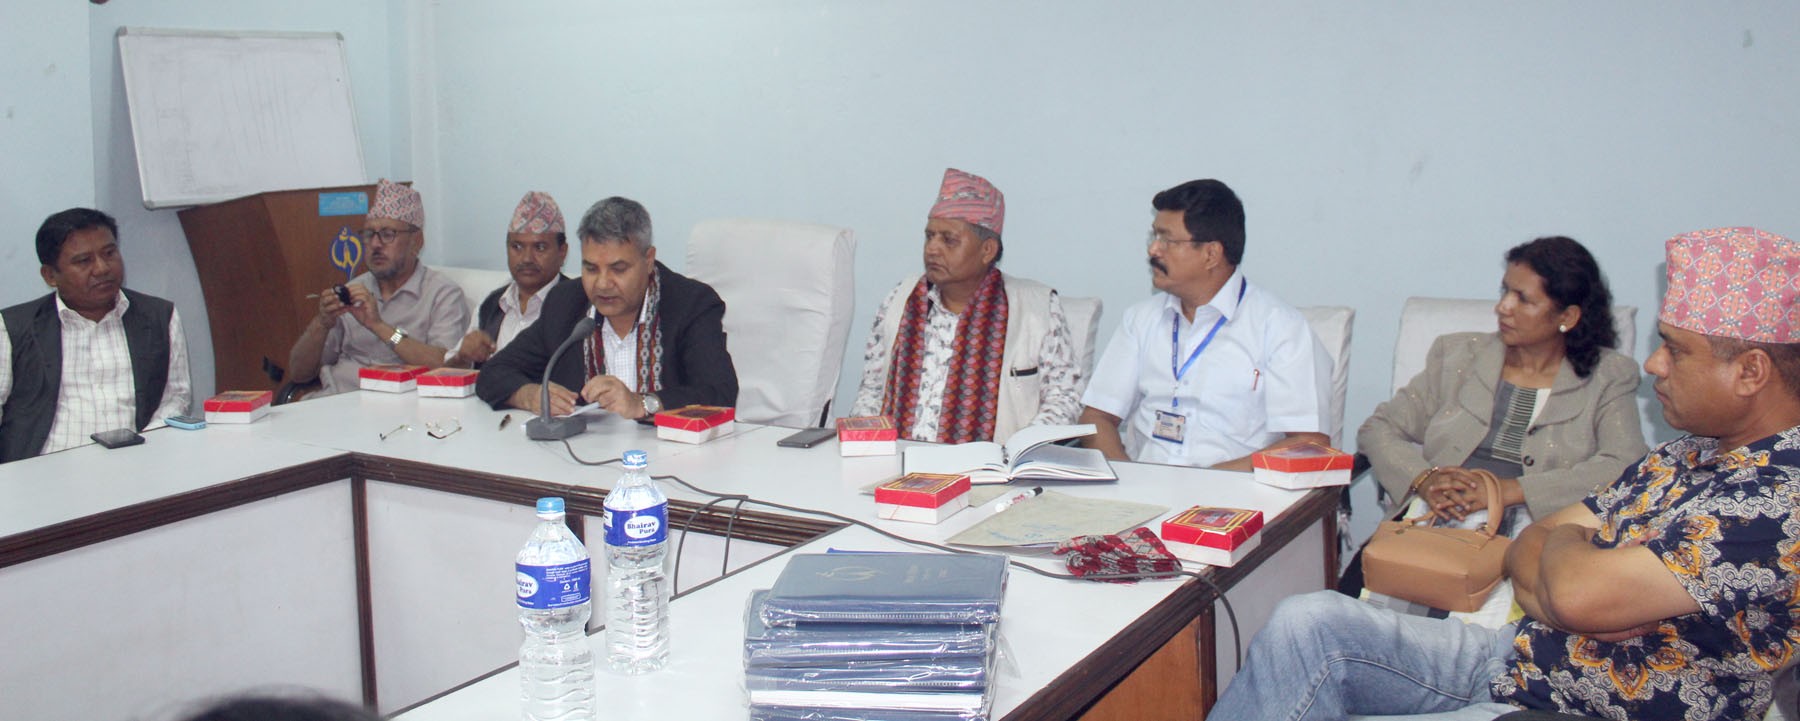 employees-unions-play-obstacle-to-nepal-telecoms-progress-minister-baskota